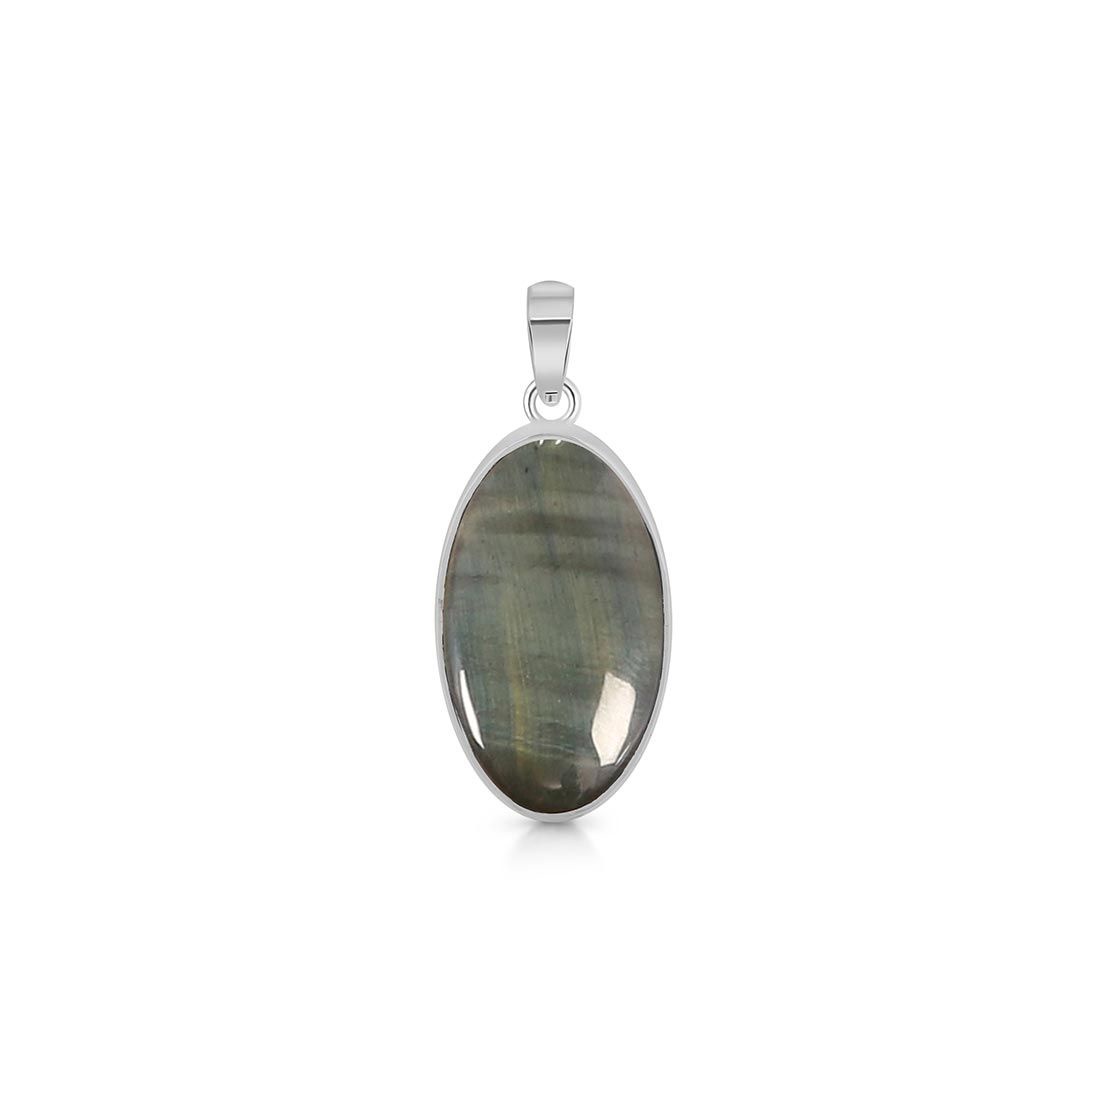 Sophisticated Elegance: Blue Tiger Eye Pendant for Timeless Style in Stunning Jewelry Designs